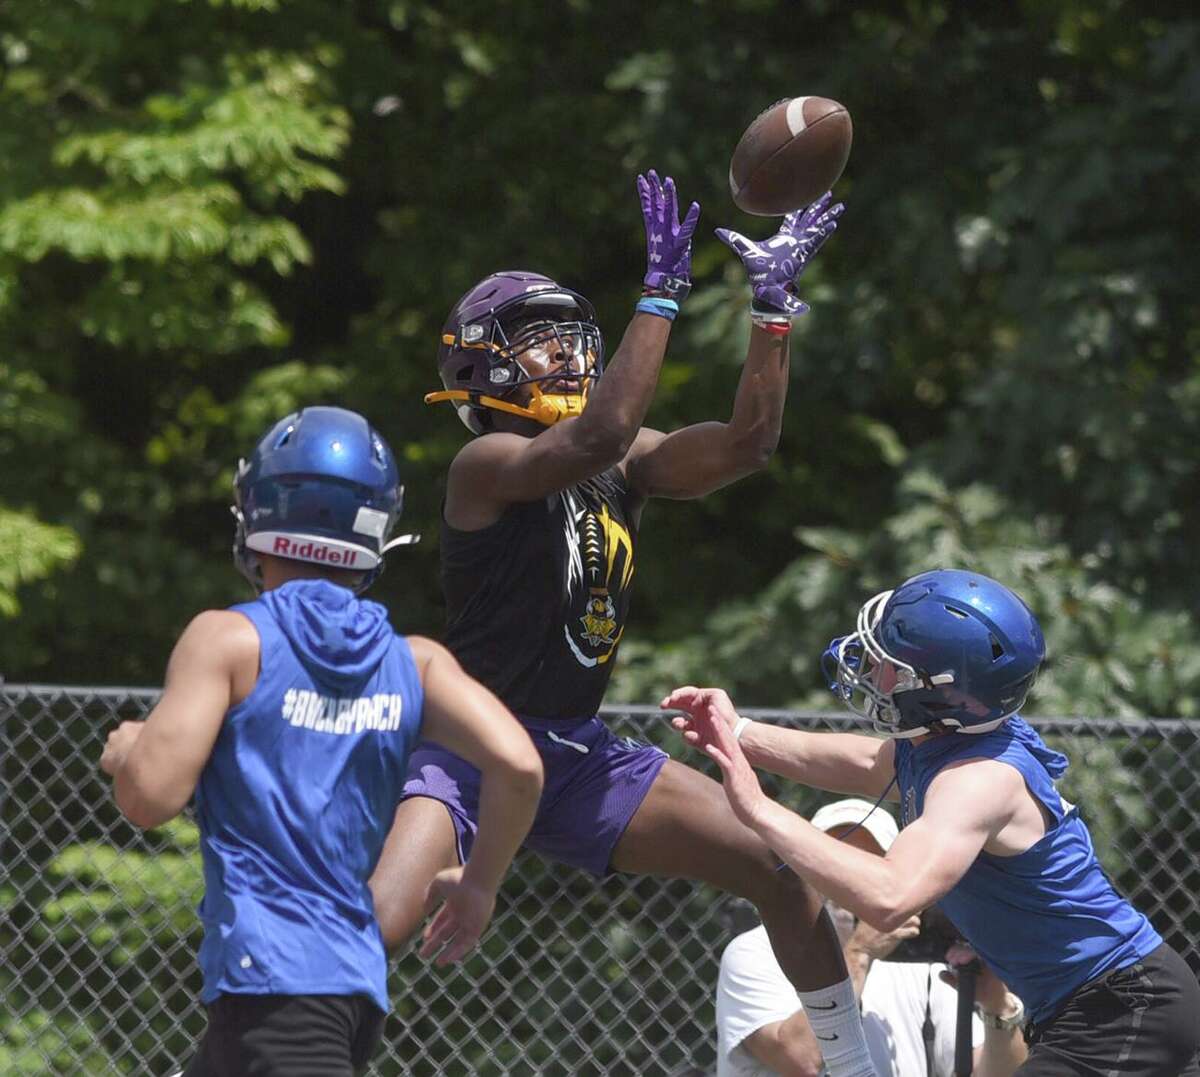 Westhill's David Moody goes up to catch a pass during day one of the Grip It and Rip It football tournament in New Canaan on Friday, July 9, 2021.